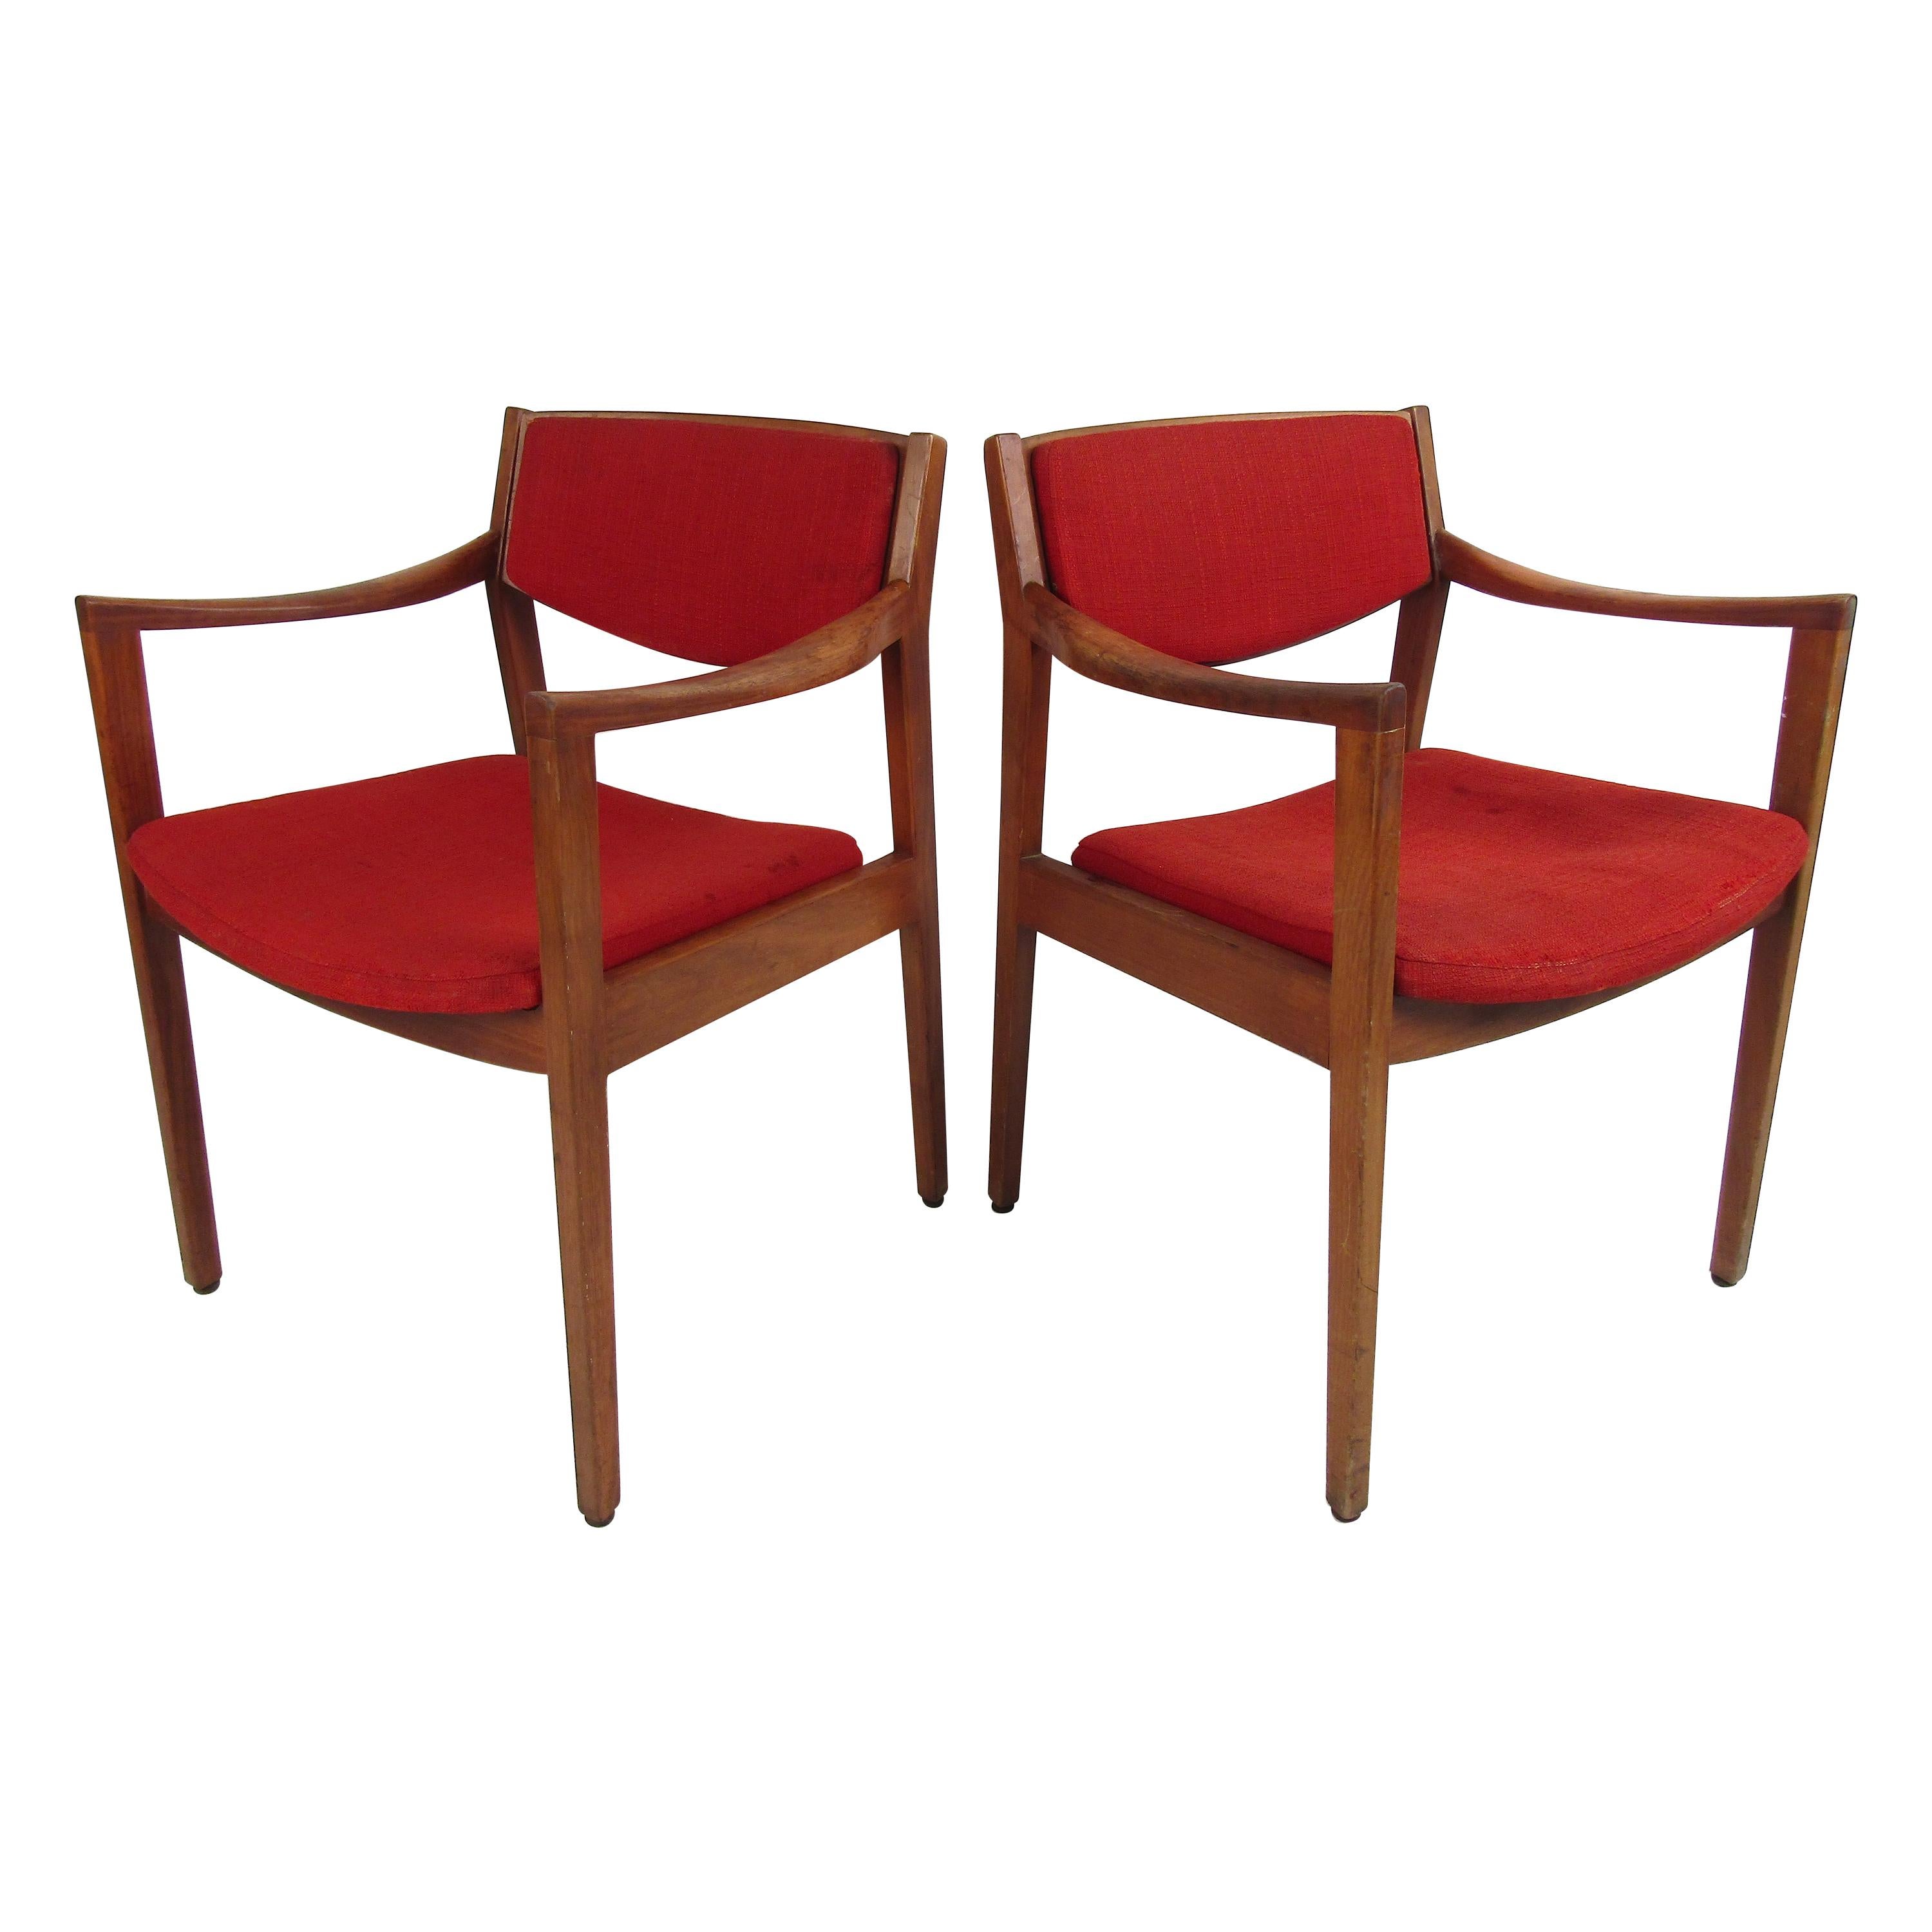 Pair of Mid-Century Modern Lounge Chairs by Gunlocke Chair Co.